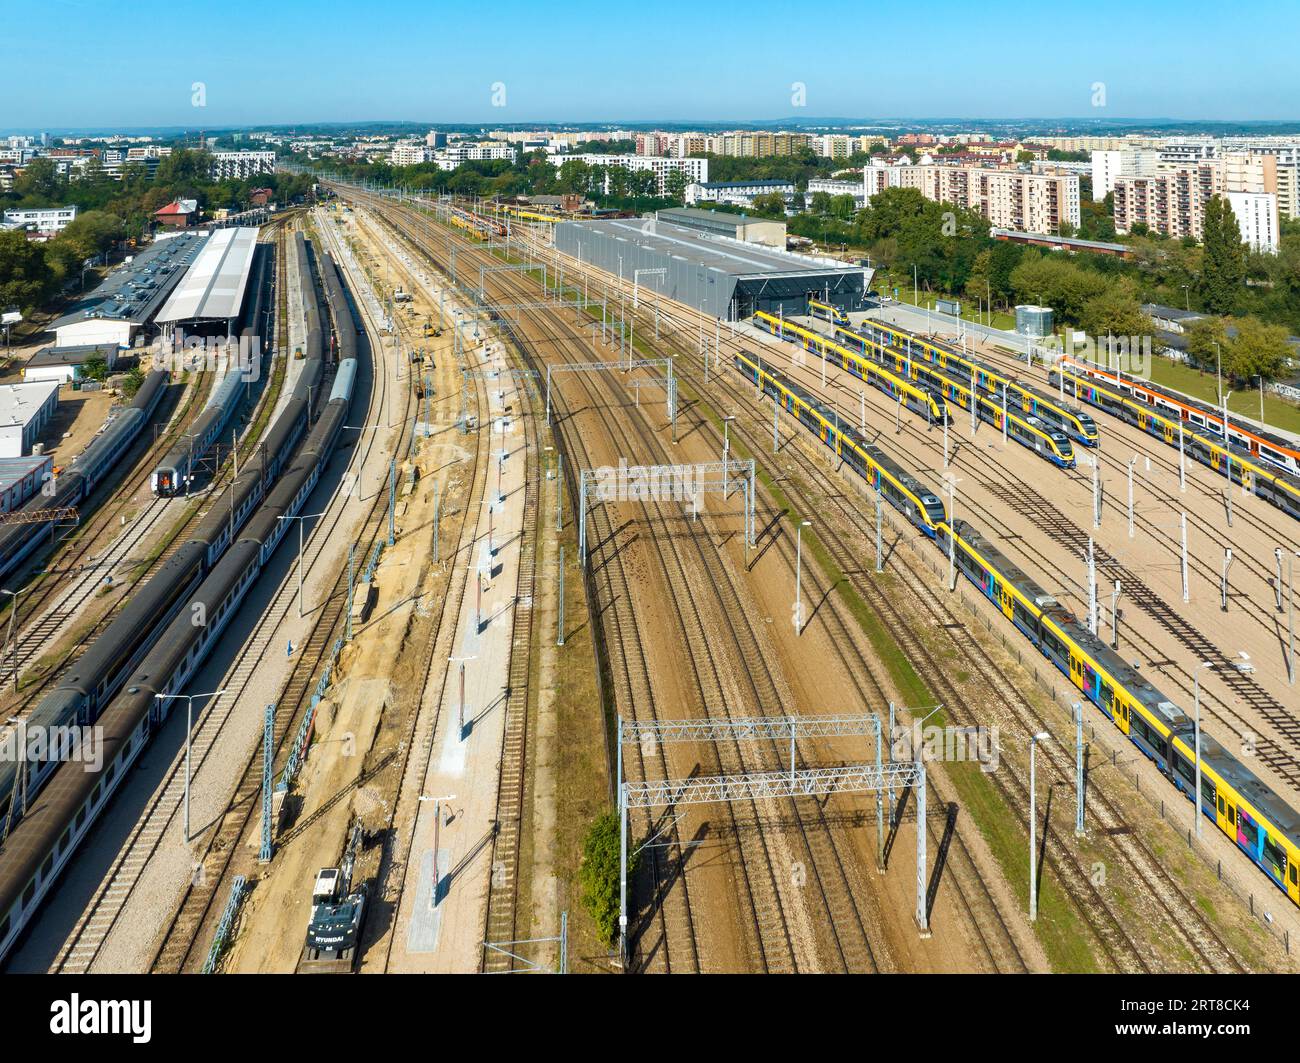 Krakow, Poland. Big train hub, outdoor and indoor garage with train sheds, fast city trains, old and new carriages, many railroad tracks, rails and el Stock Photo